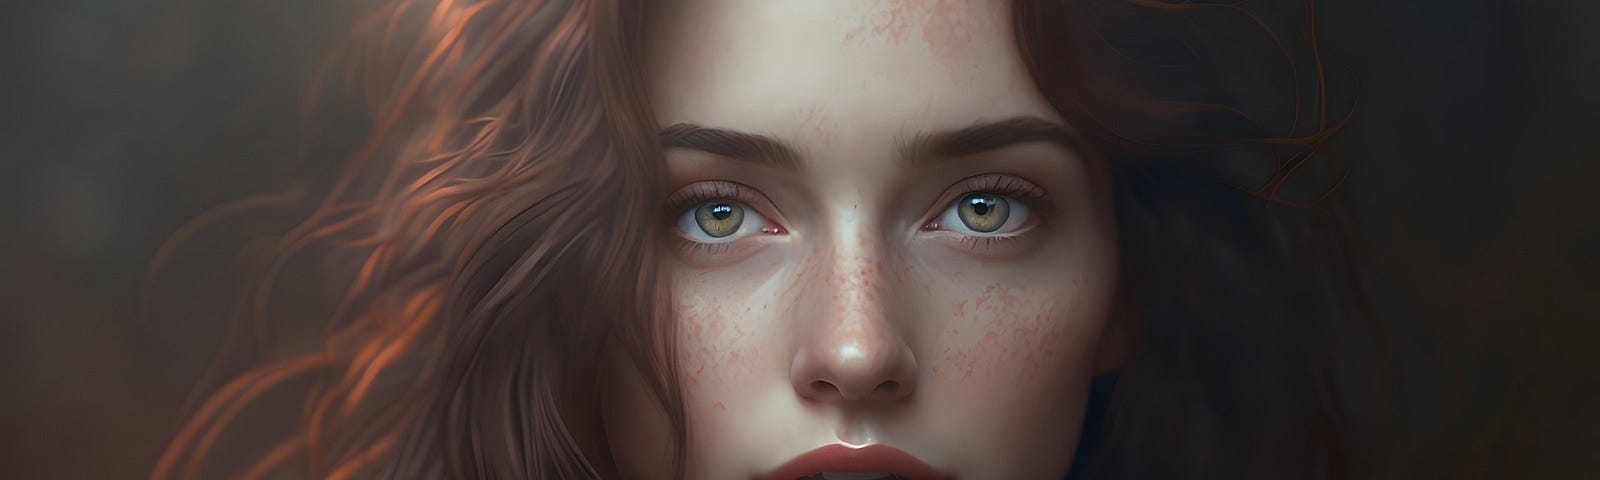 Redhead girl with honey-green eyes and some freckles on her face.